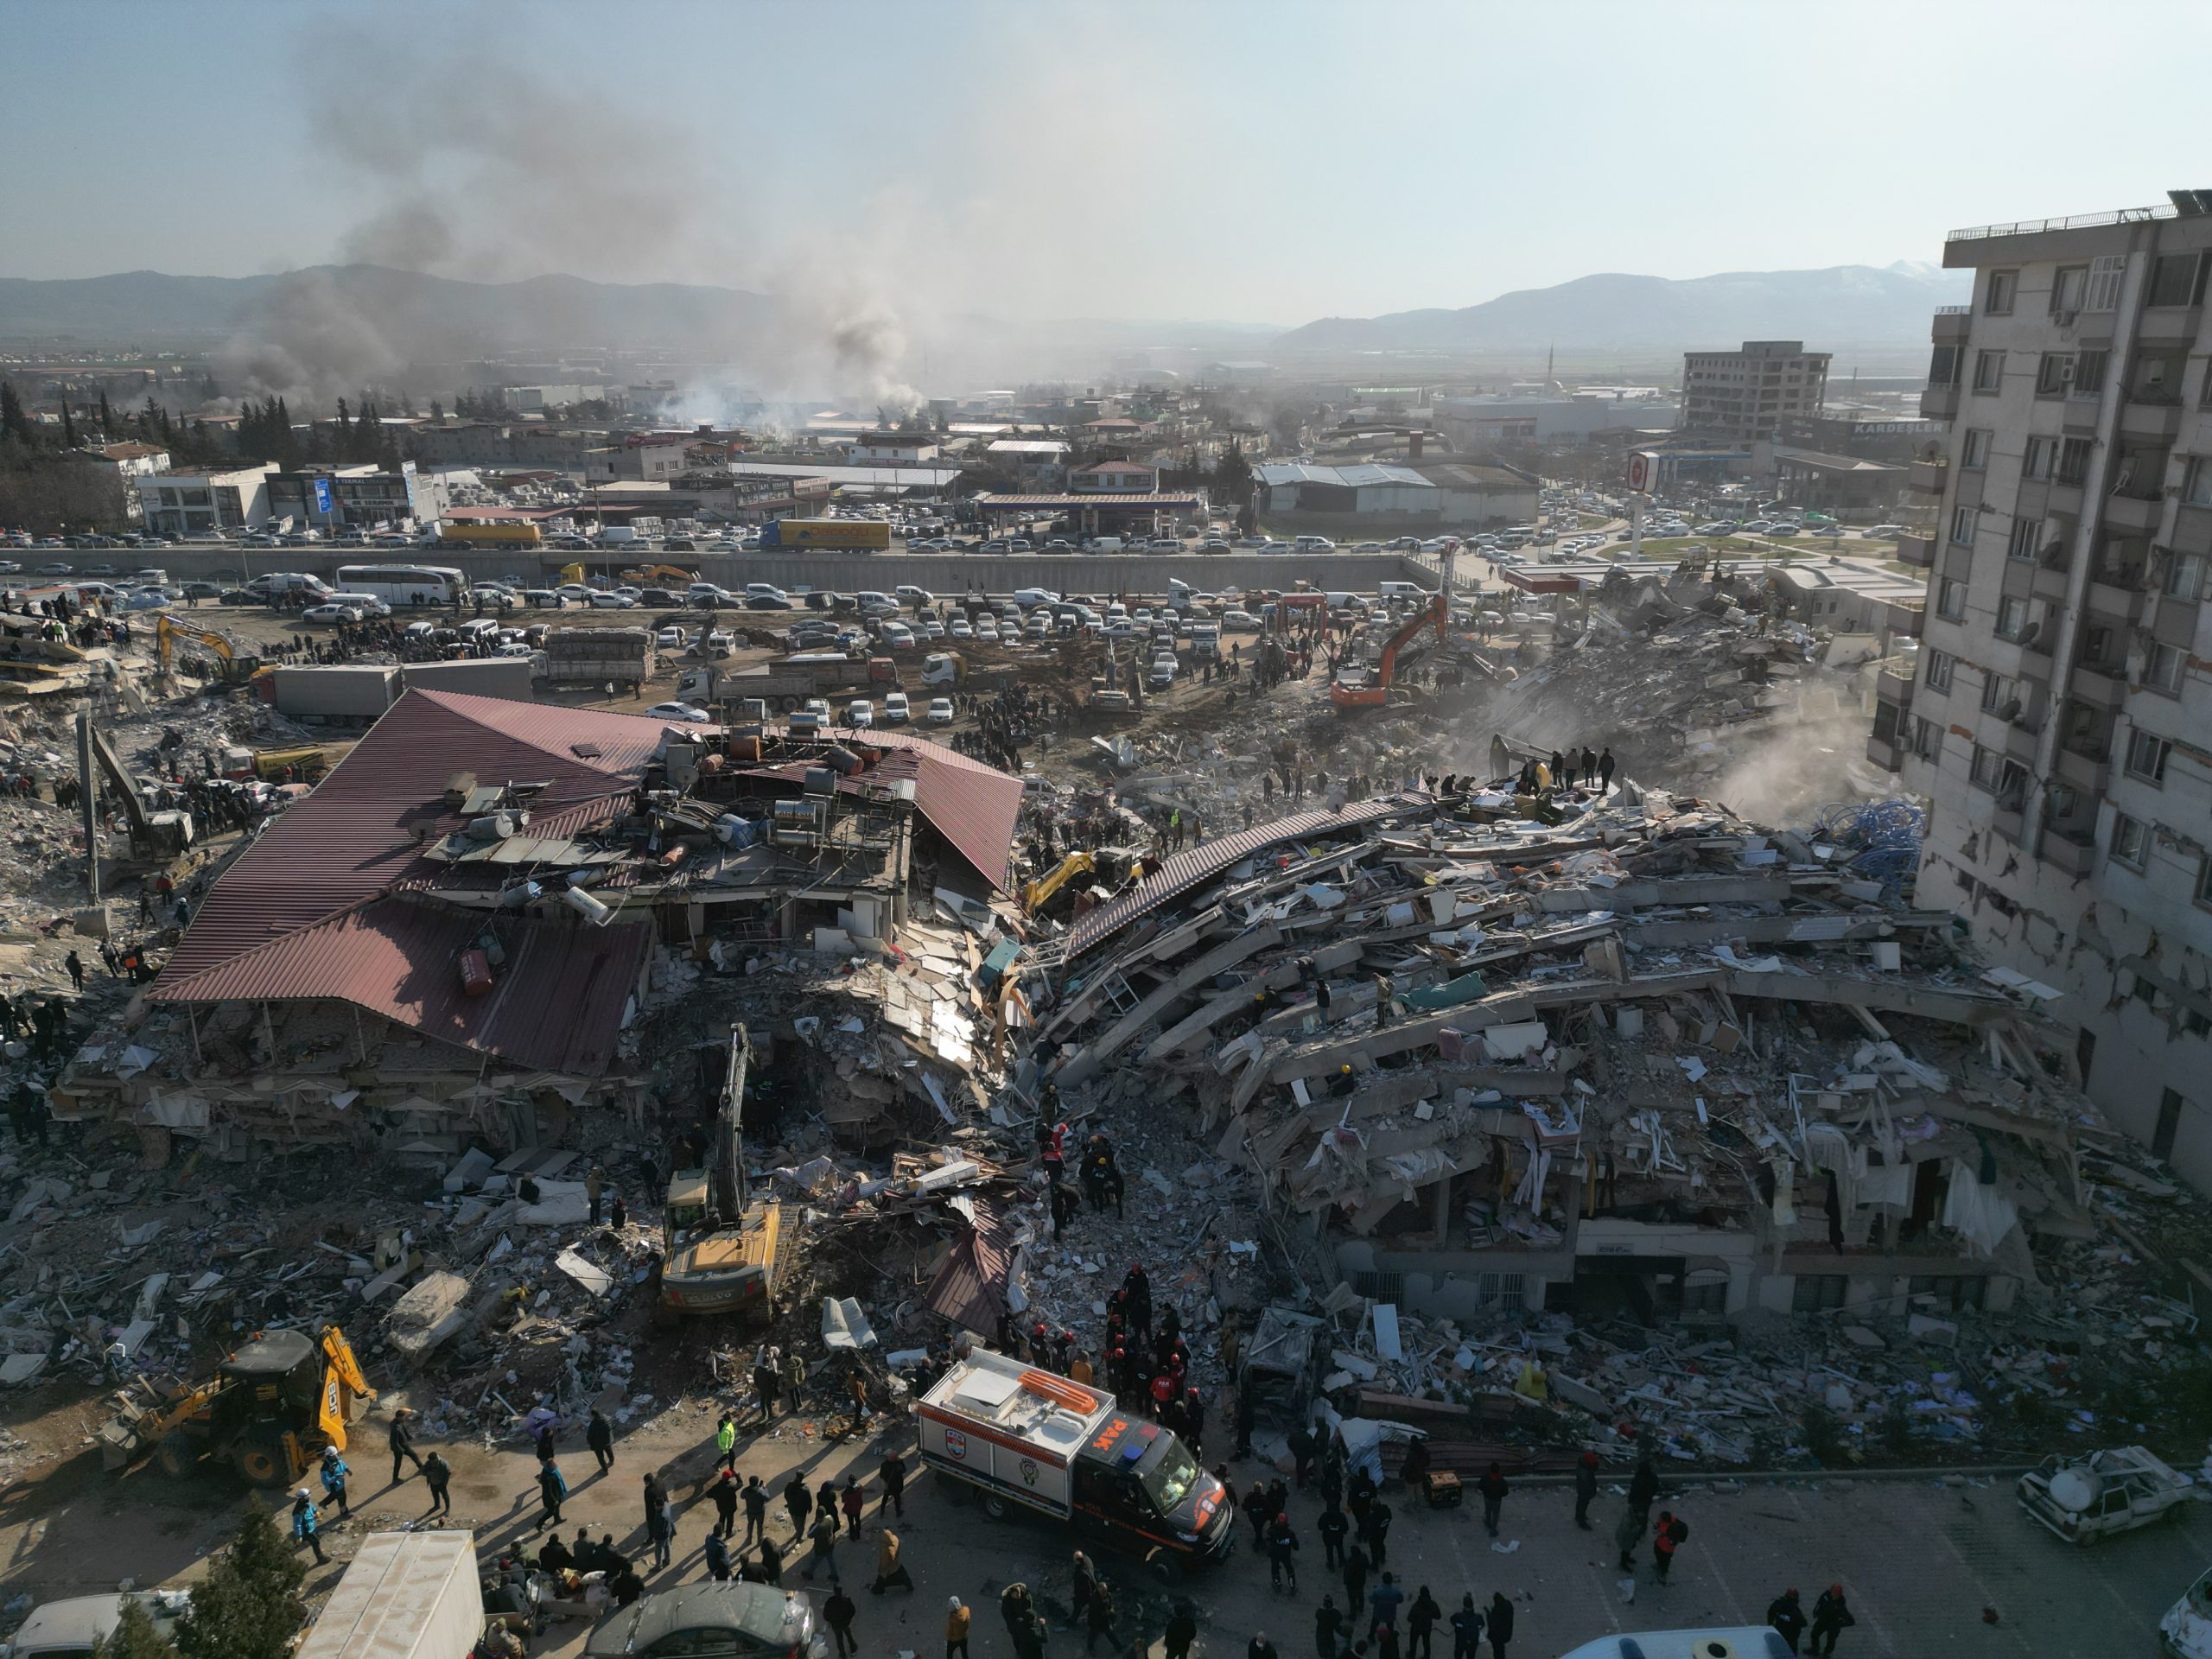 epa10457386 A photo taken with a drone shows emergency services working among the rubble of collapsed buildings in the aftermath of a poweful earthquake in Kahramanmaras, southeastern Turkey, 09 February 2023. More than 17,000 people have died and thousands more were injured after two major earthquakes struck southern Turkey and northern Syria on 06 February. Authorities fear the death toll will keep climbing as rescuers look for survivors across the region.  EPA/ABIR SULTAN